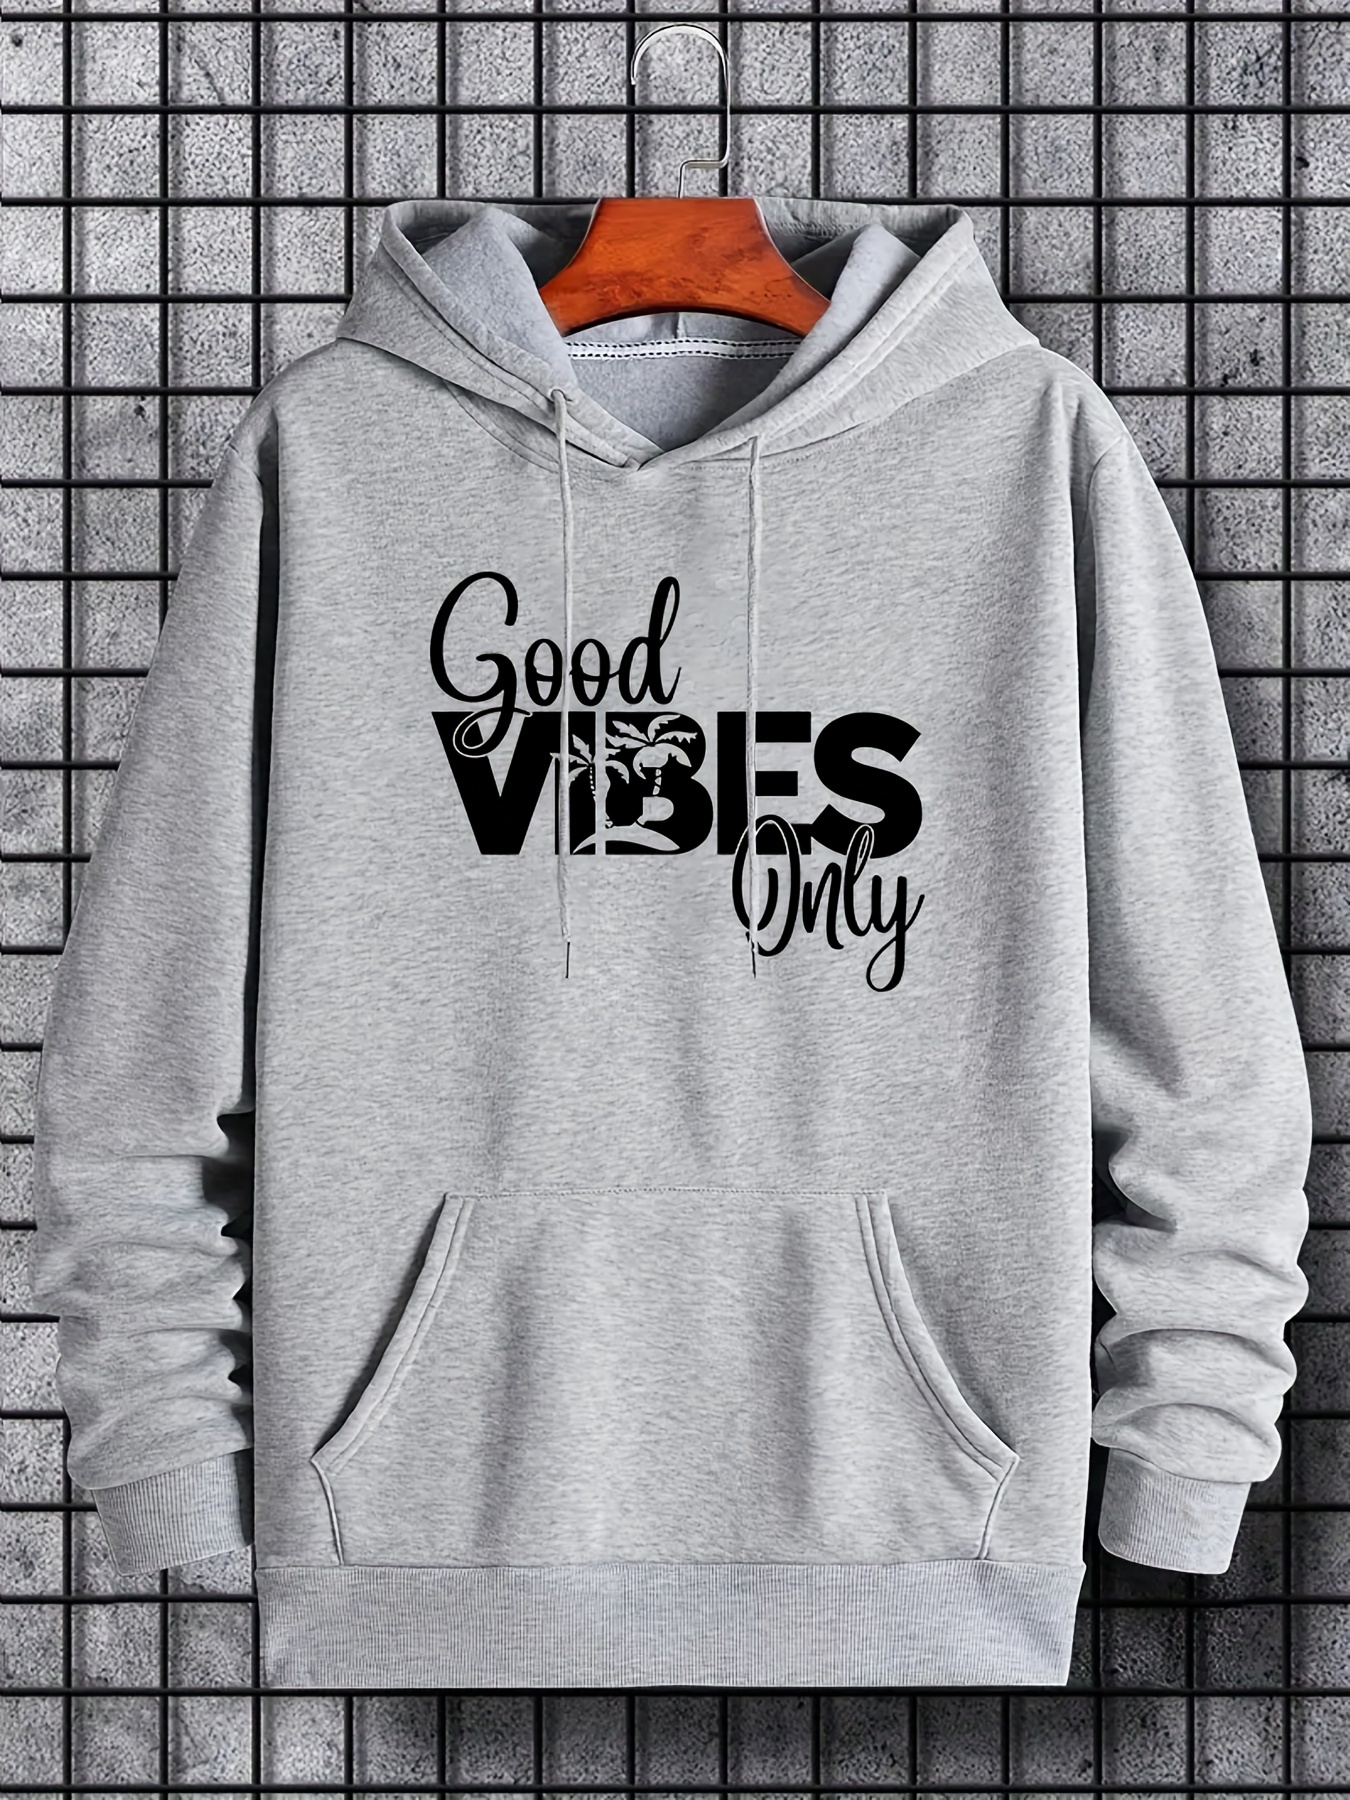 Men's Letter Graphic Hoodies Autumn Winter Casual Loose Long